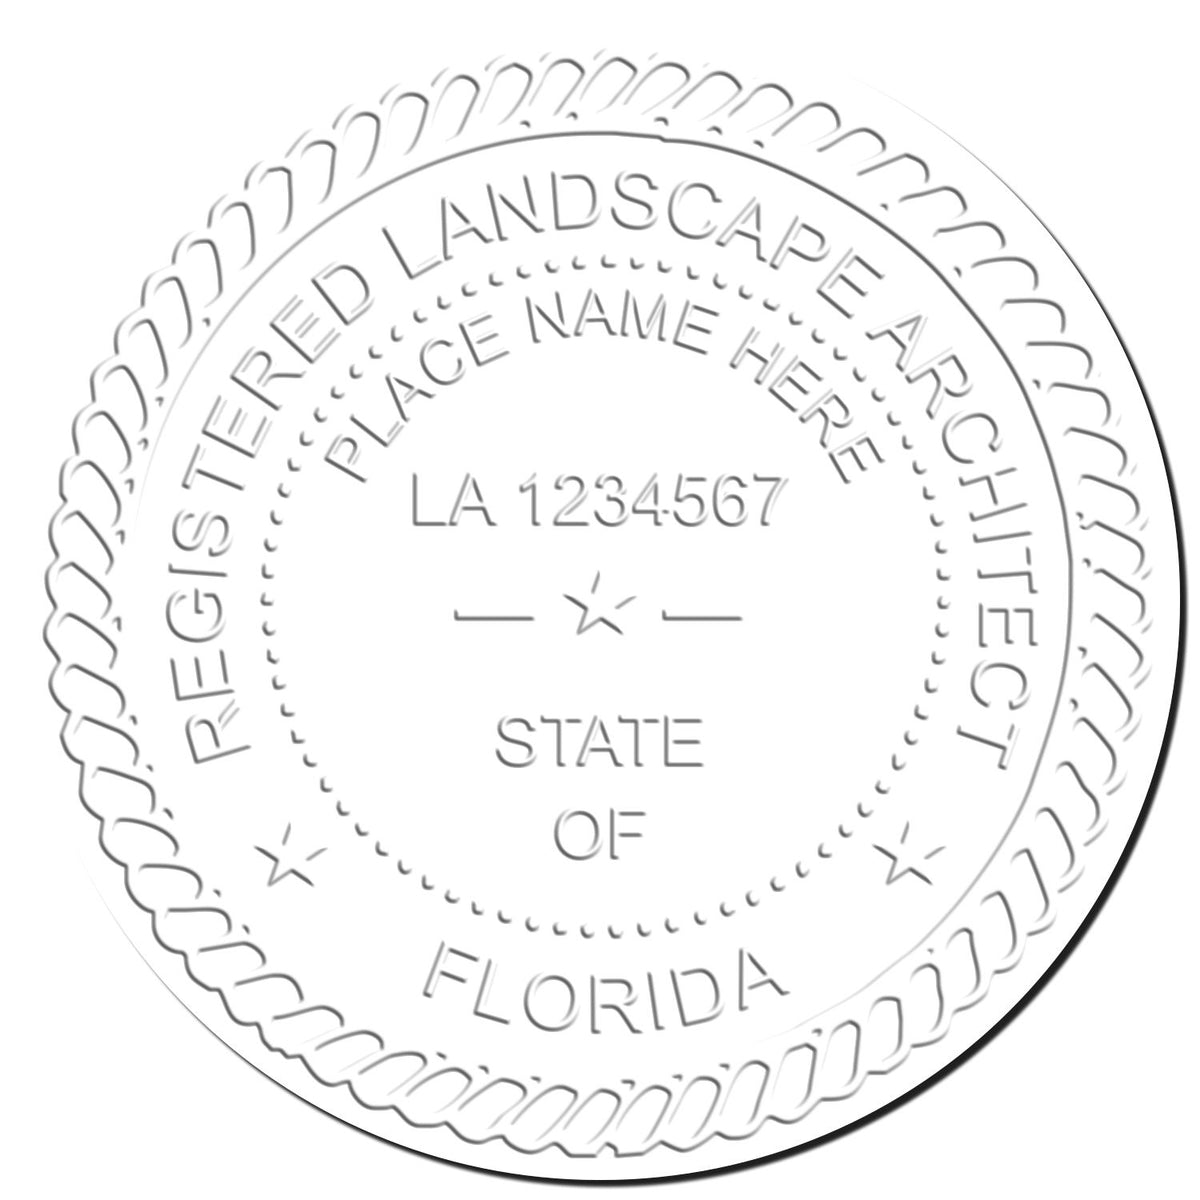 This paper is stamped with a sample imprint of the Gift Florida Landscape Architect Seal, signifying its quality and reliability.